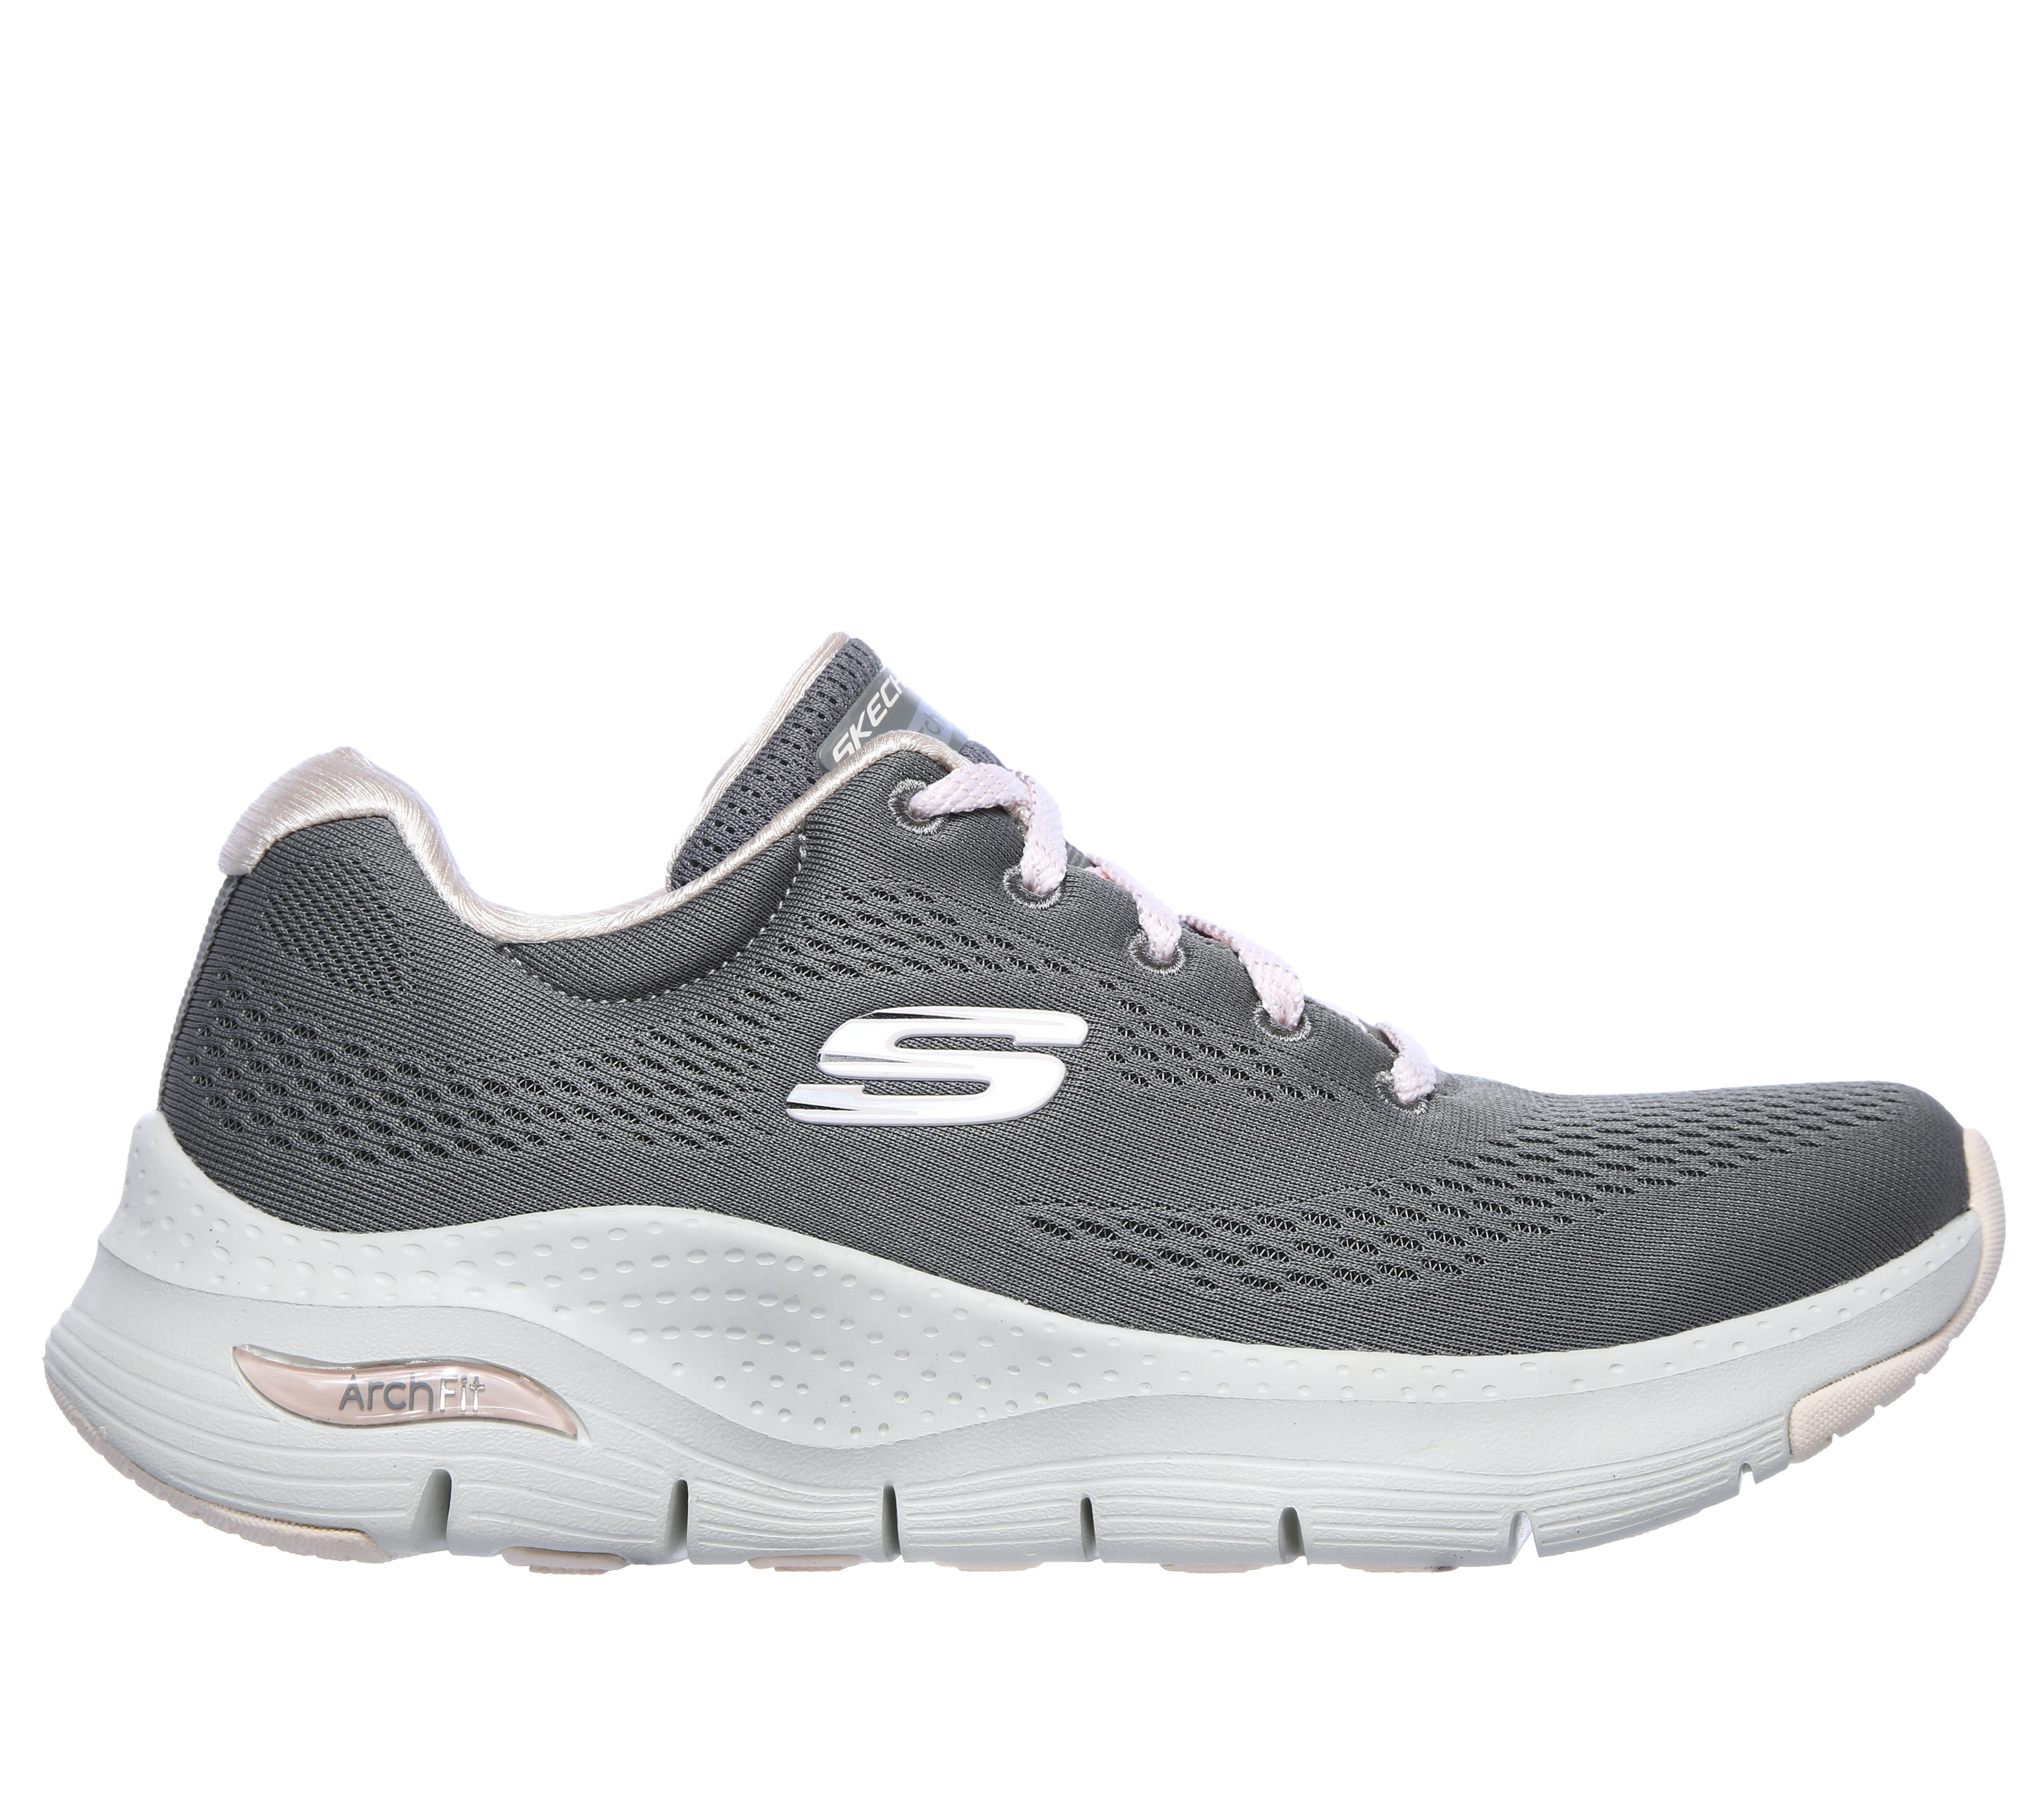 Arch Fit - Big Appeal | SKECHERS